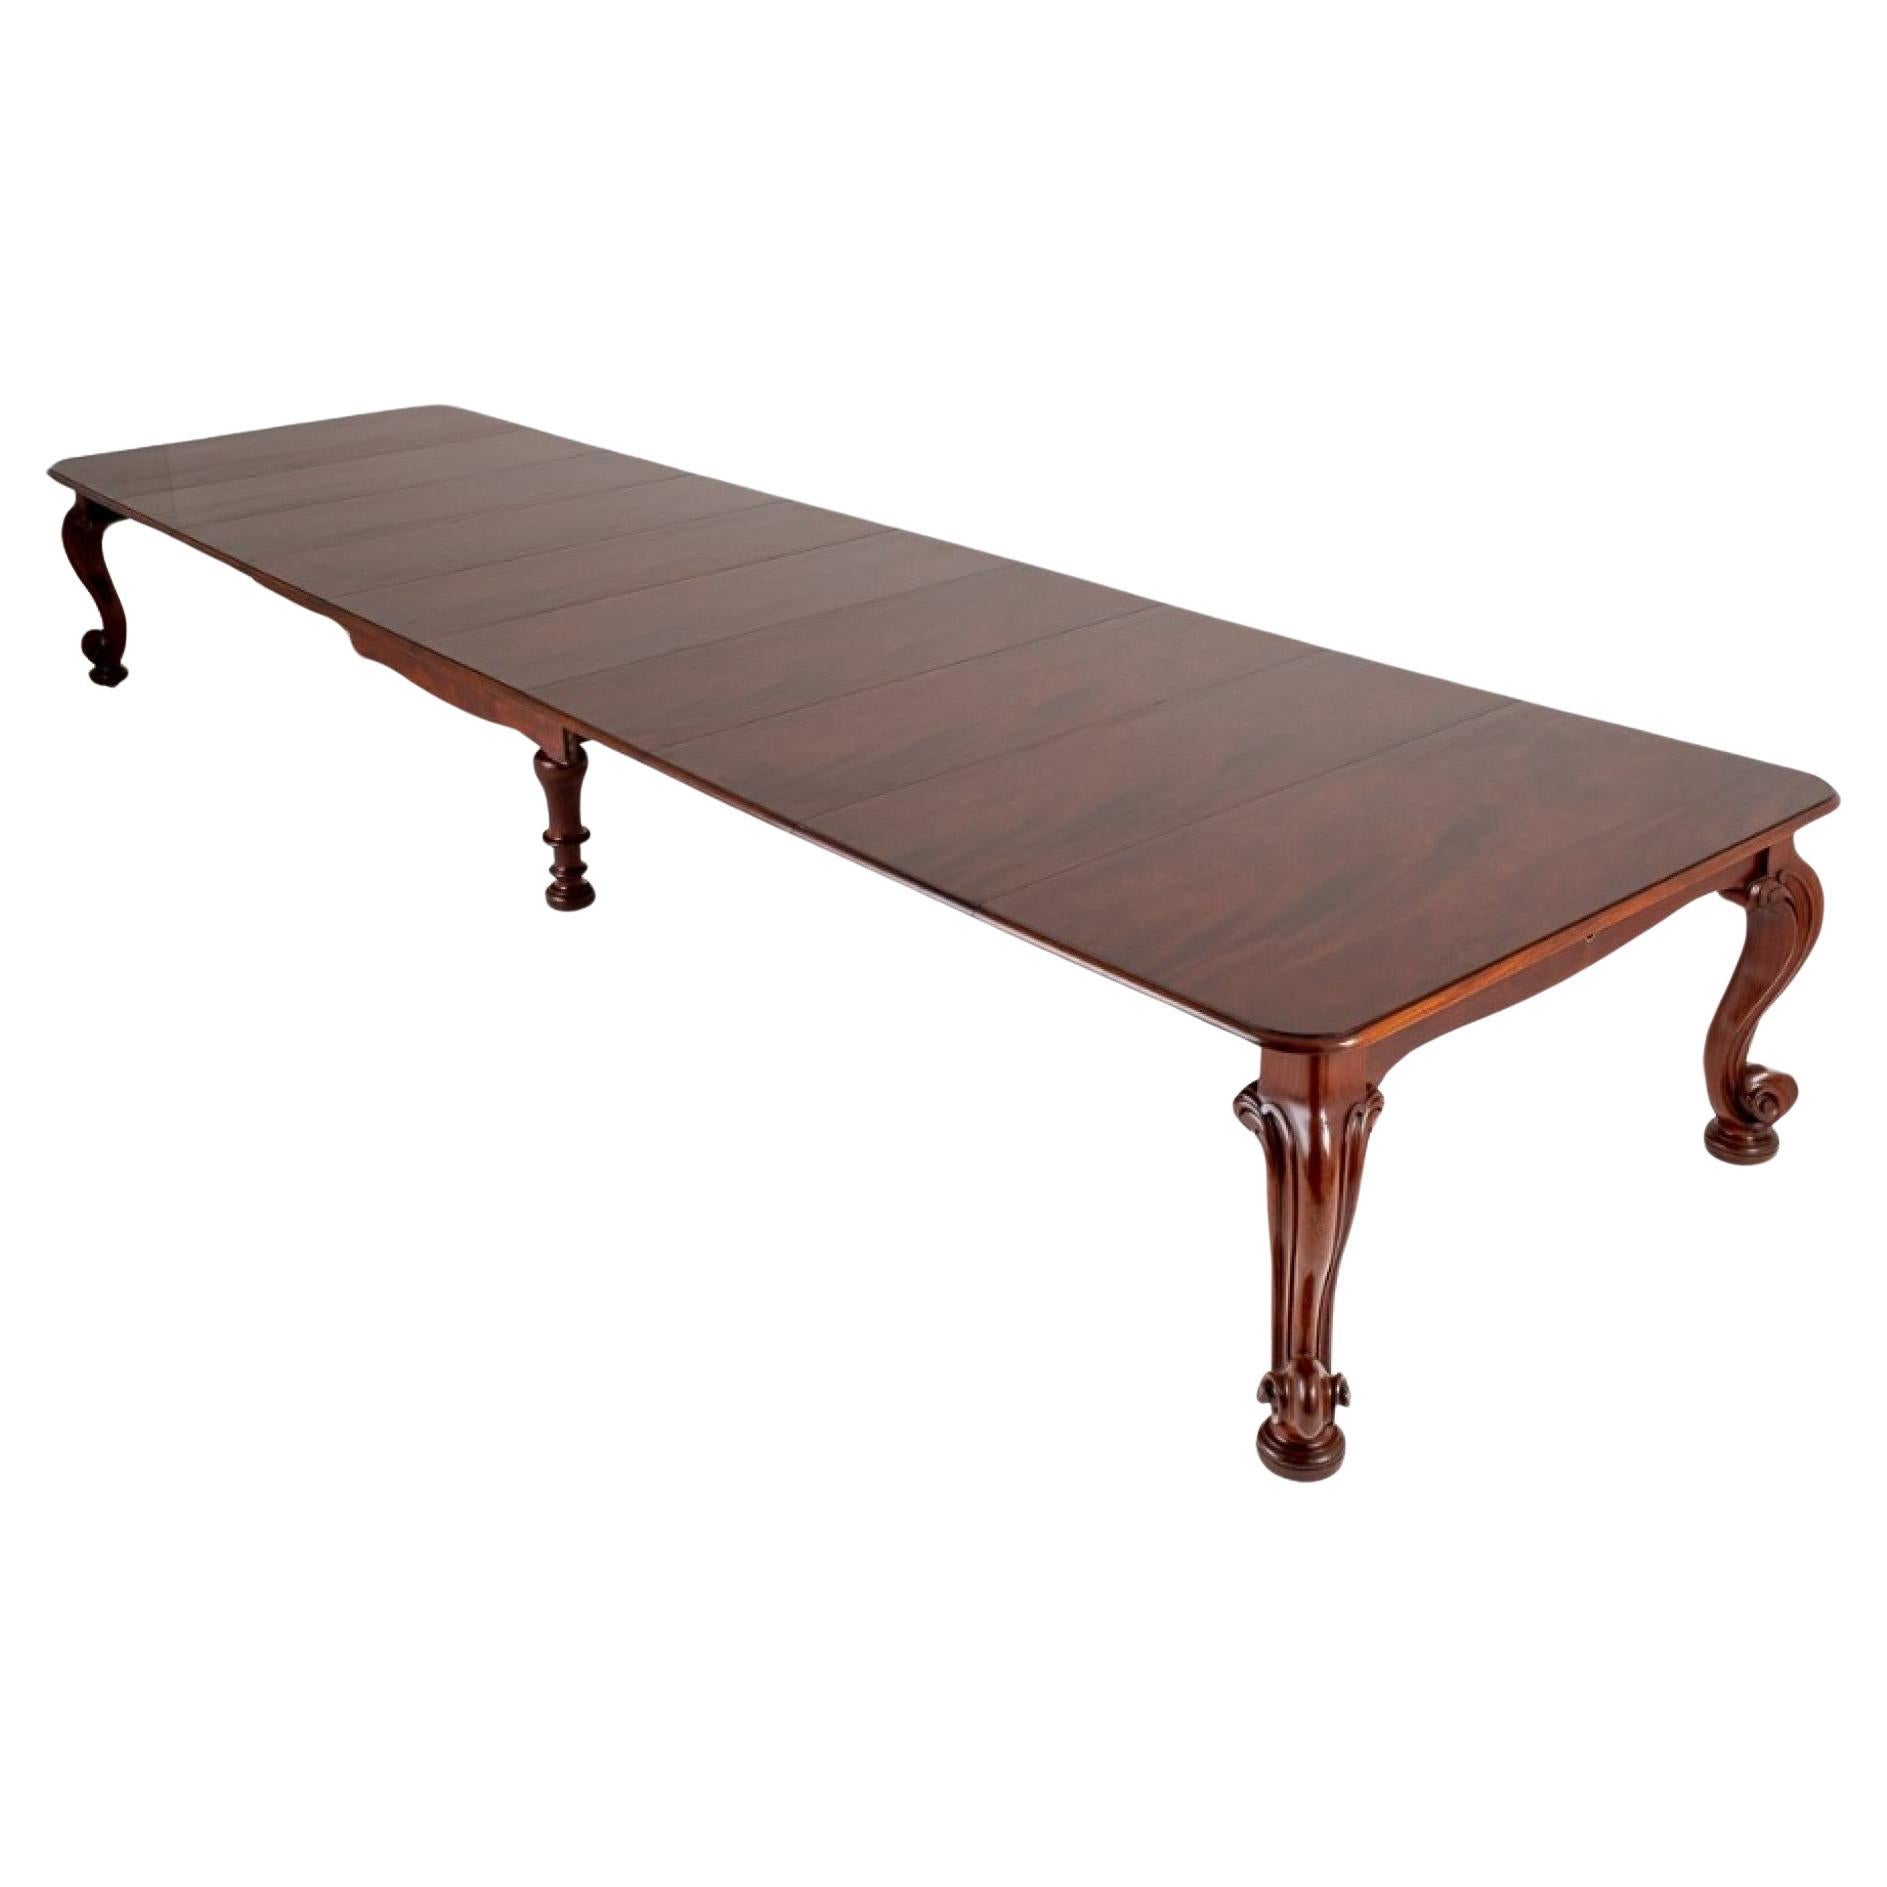 Giant Victorian Dining Table Seats 24 by Samuel Hawkins 1860